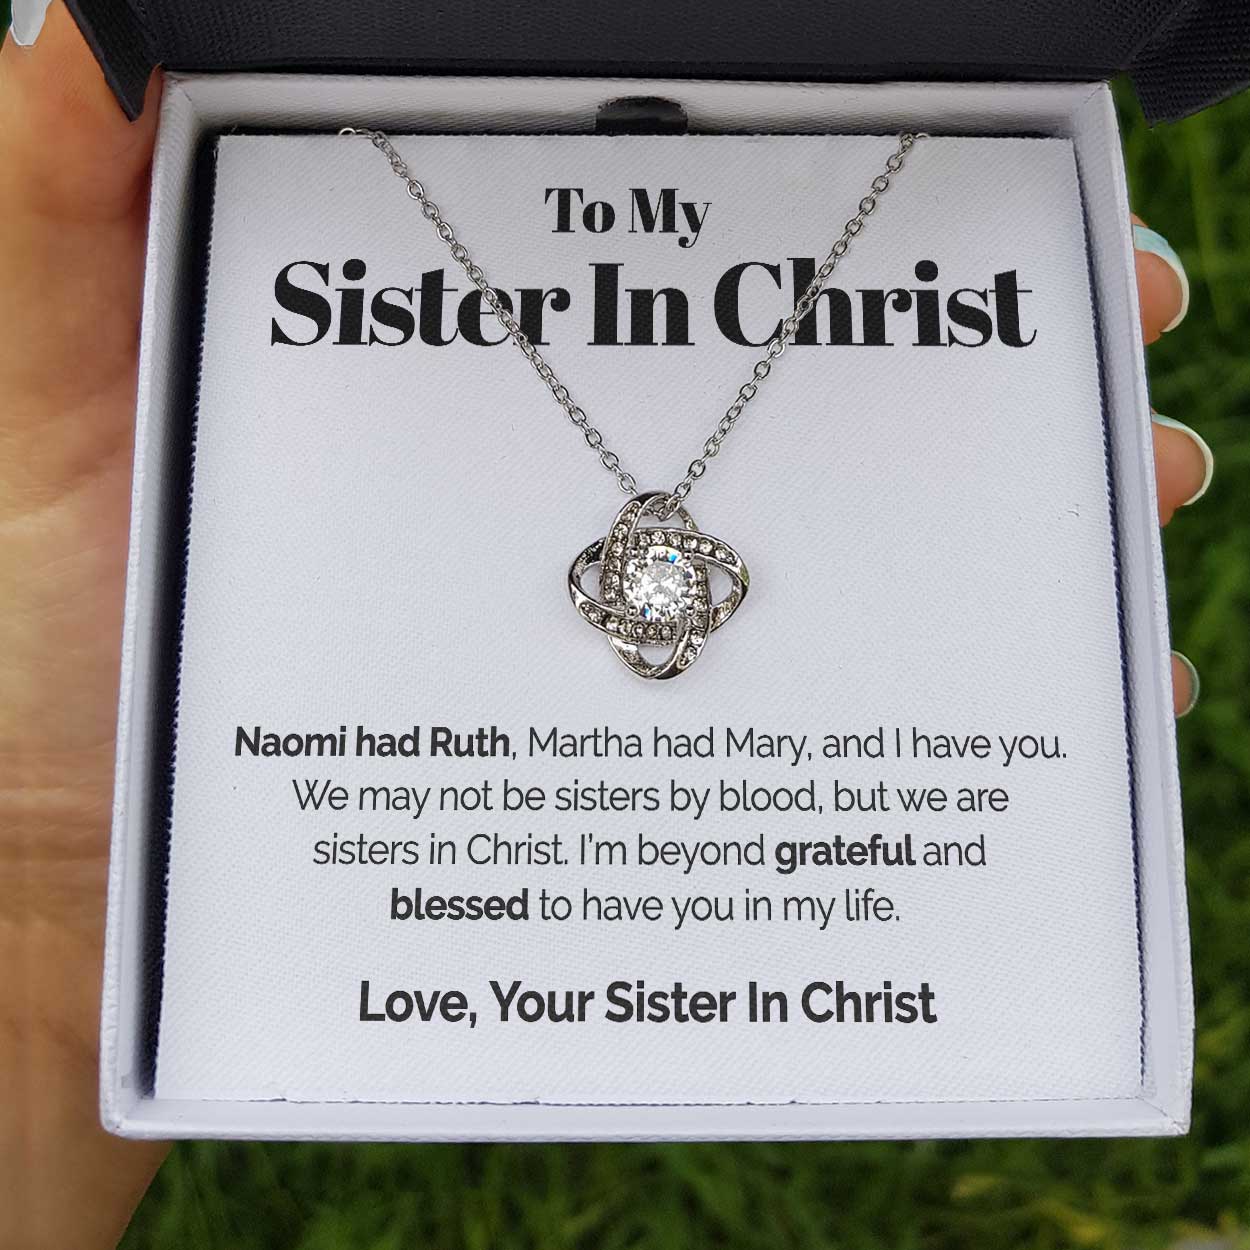 ShineOn Fulfillment Jewelry Standard Box To My Sister In Christ - I Have You - Love Knot Necklace